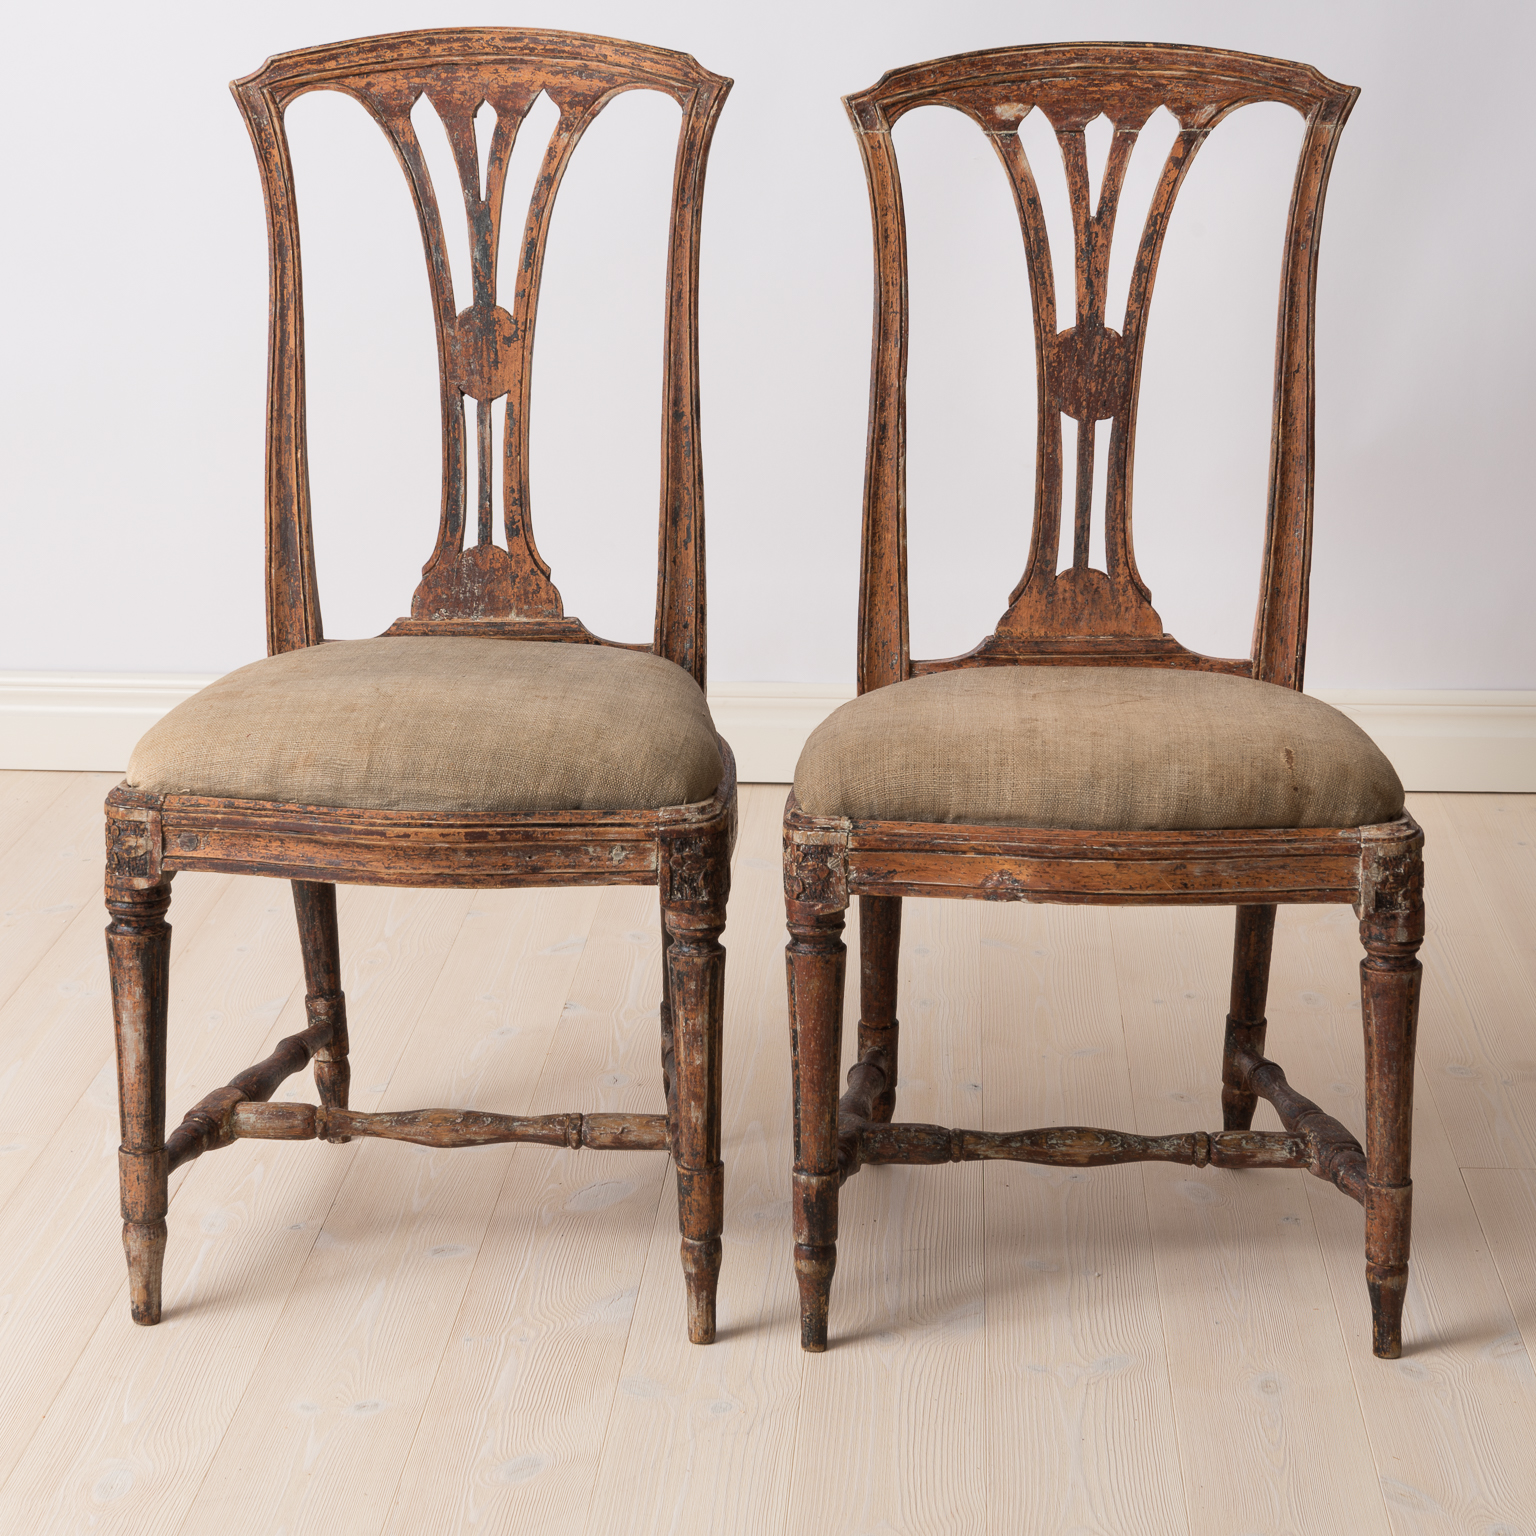 A pair of Swedish Period Gustavian Chairs Made in Stockholm Circa 1775